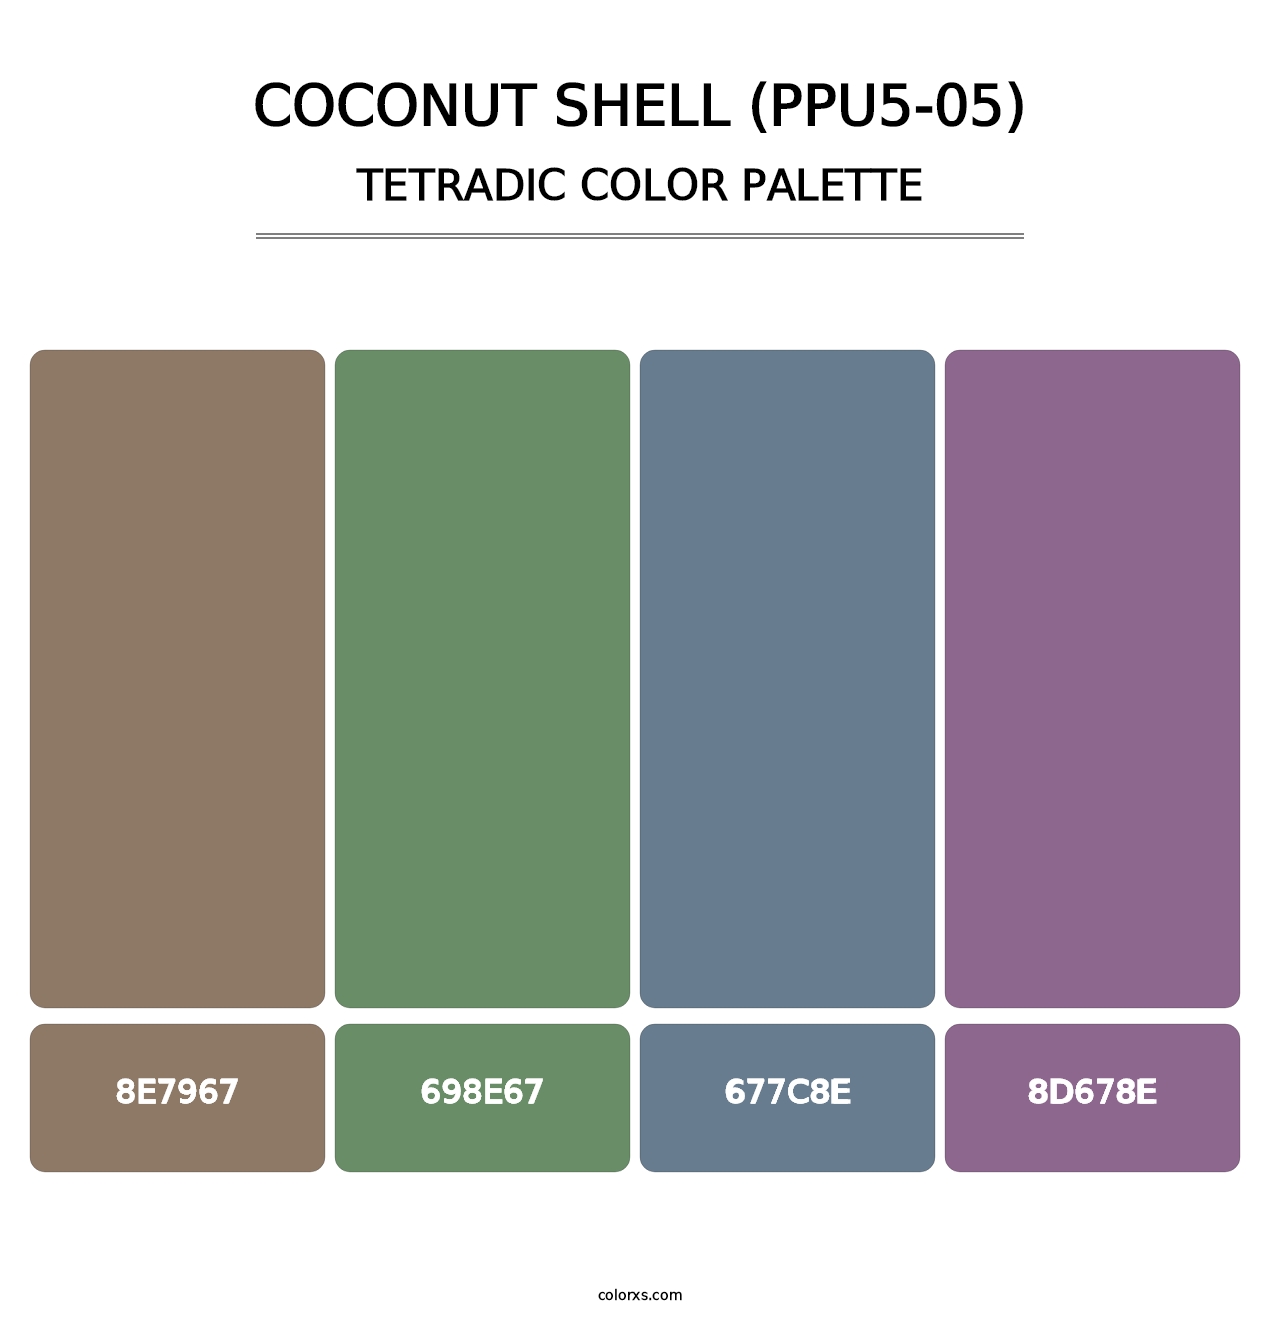 Coconut Shell (PPU5-05) - Tetradic Color Palette